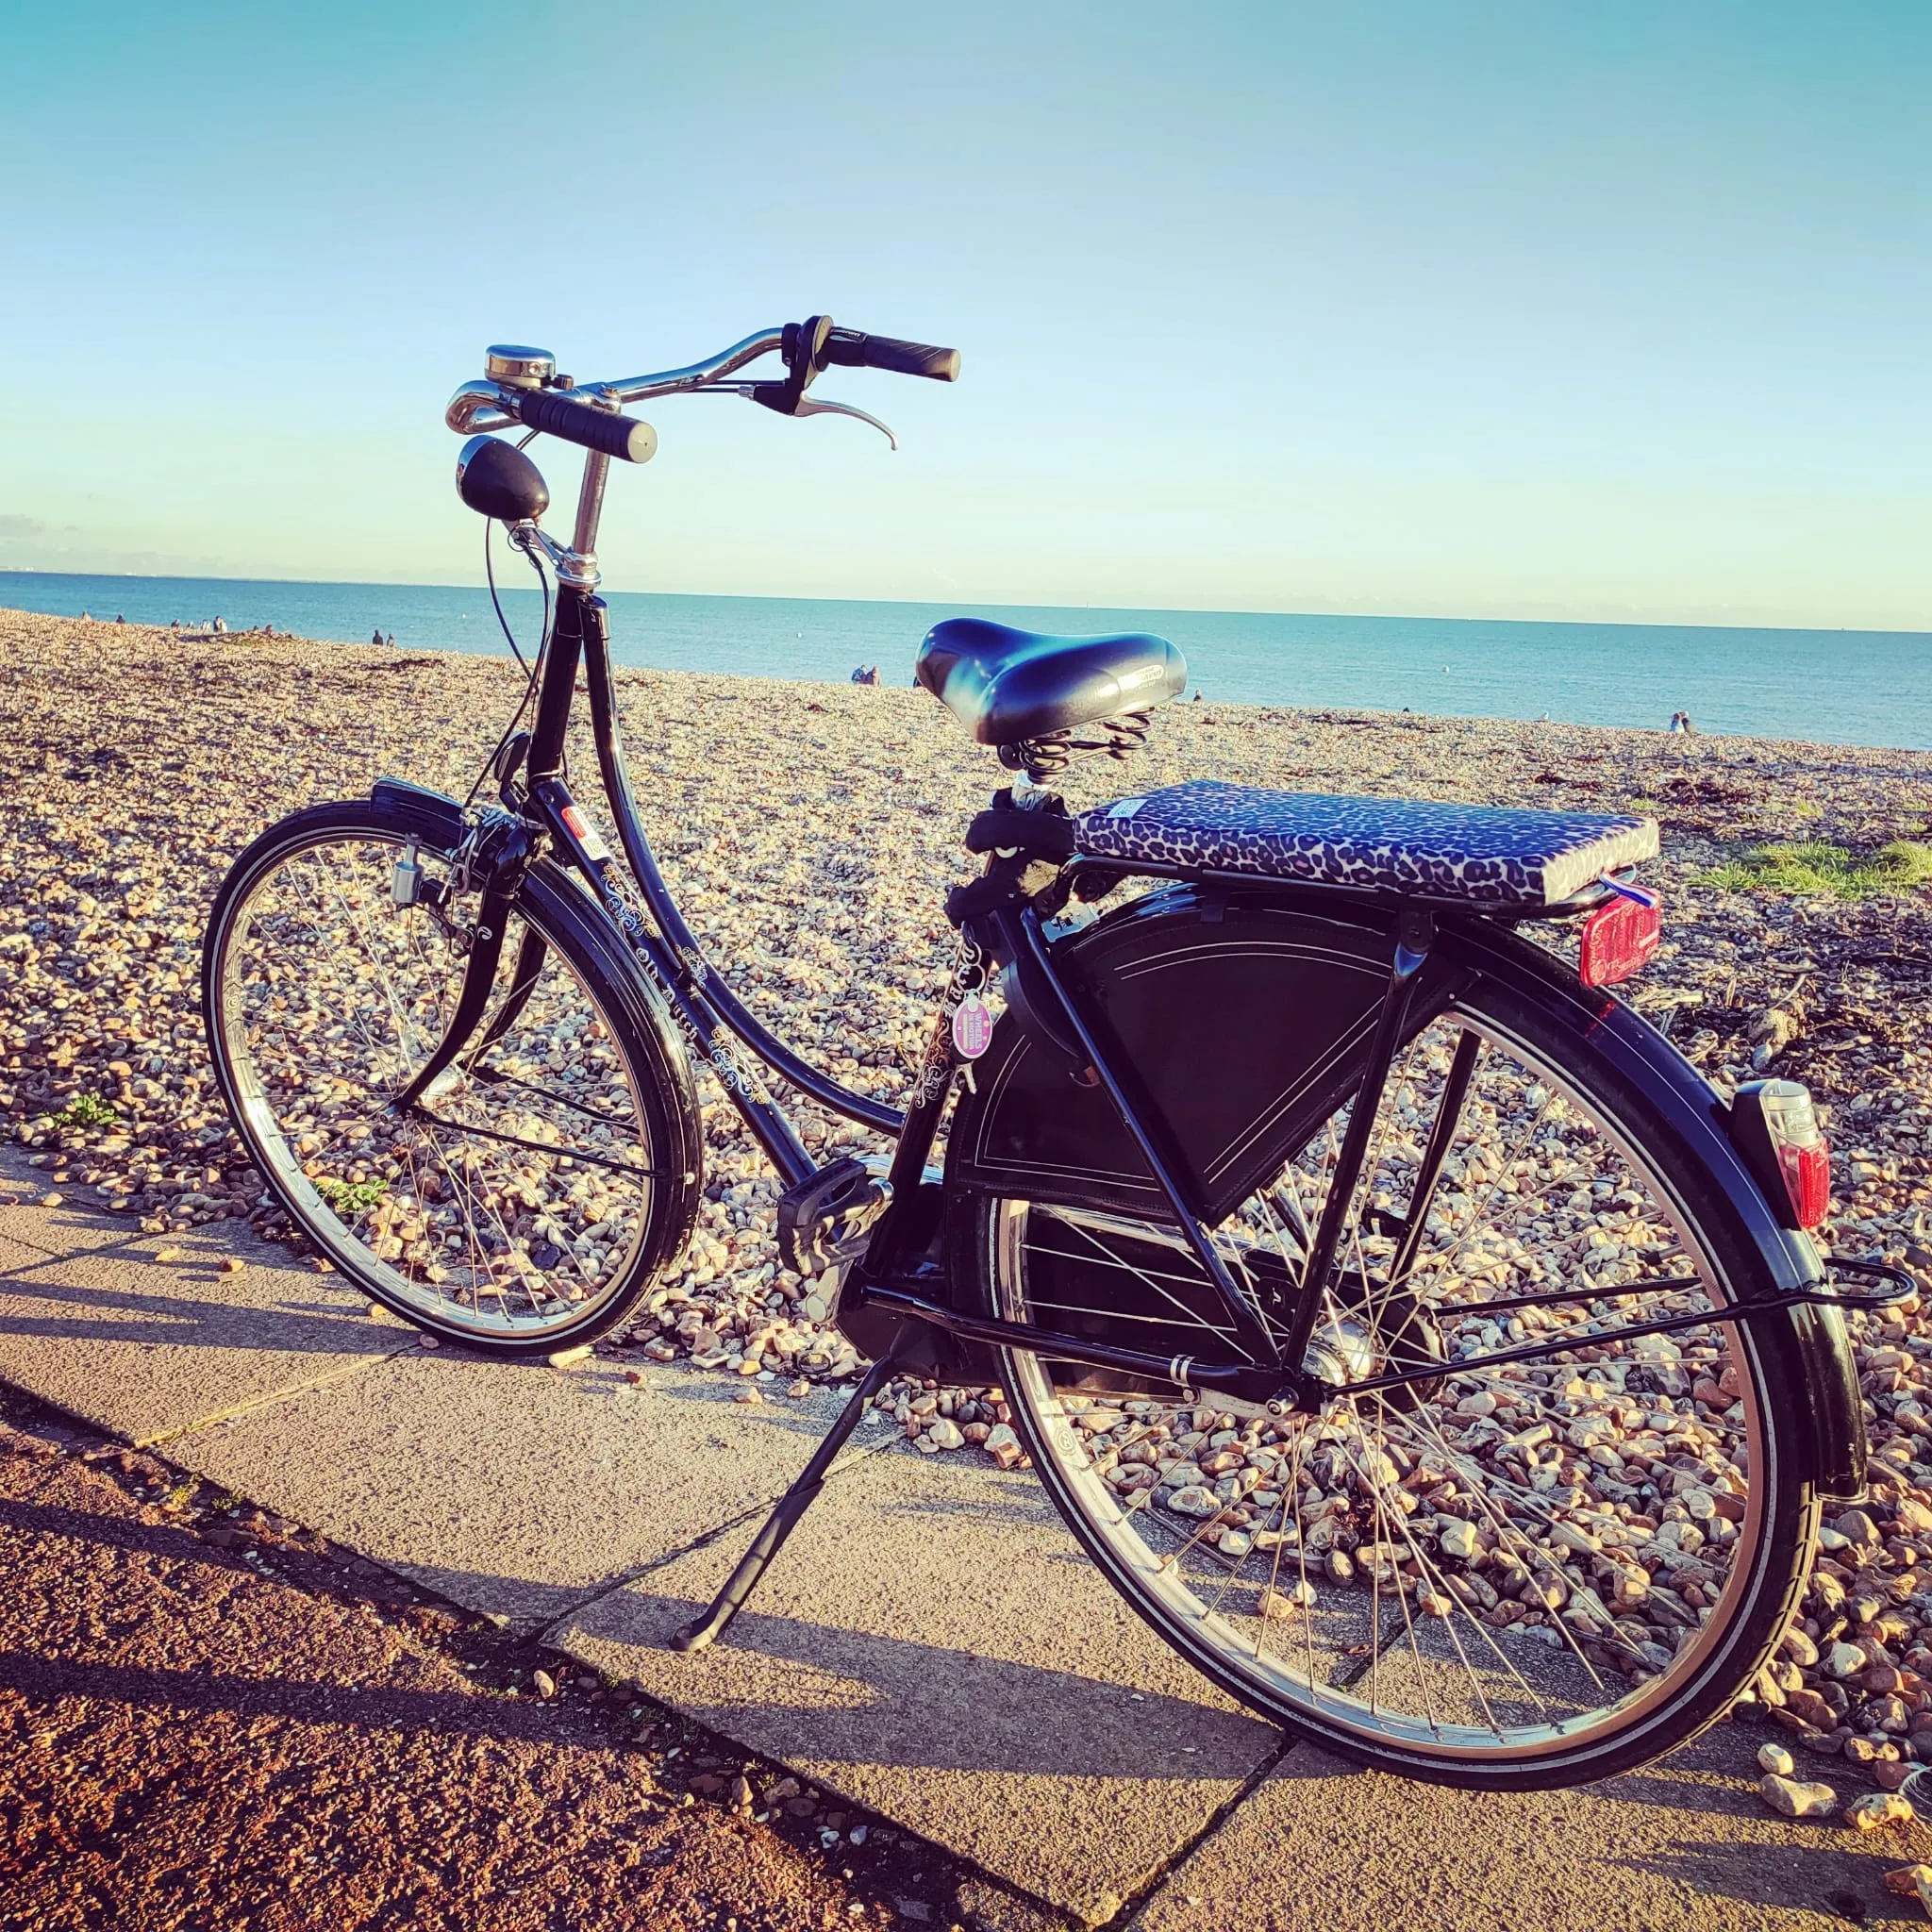 Bike on the seafront